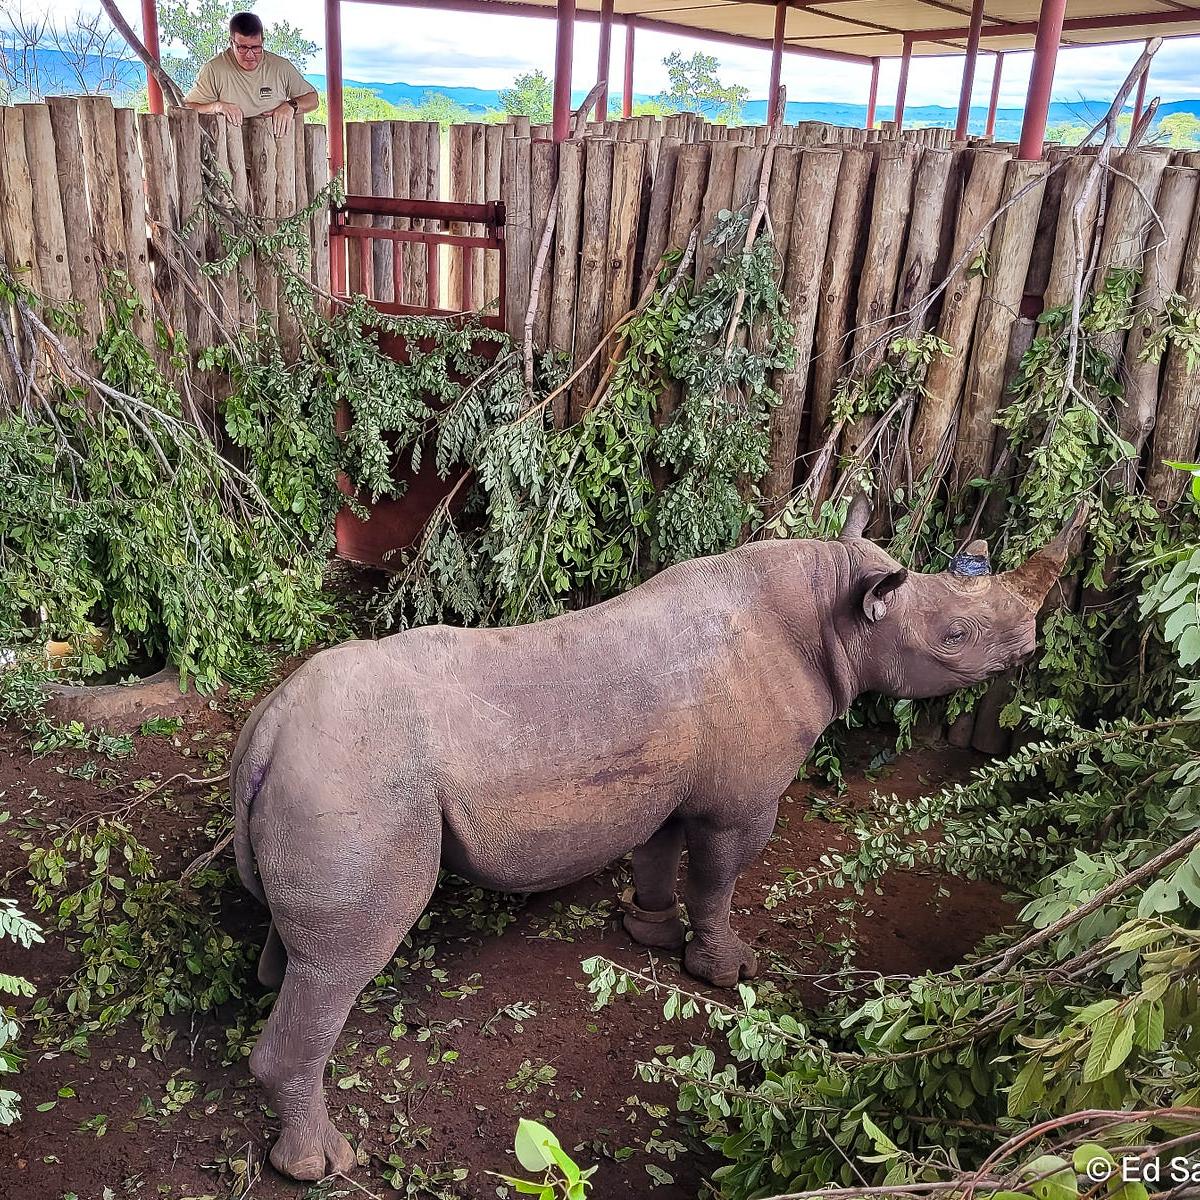 Chilunda, a young black rhino, is back home in Zambia in a wooden pen surrounded by leafy branches.